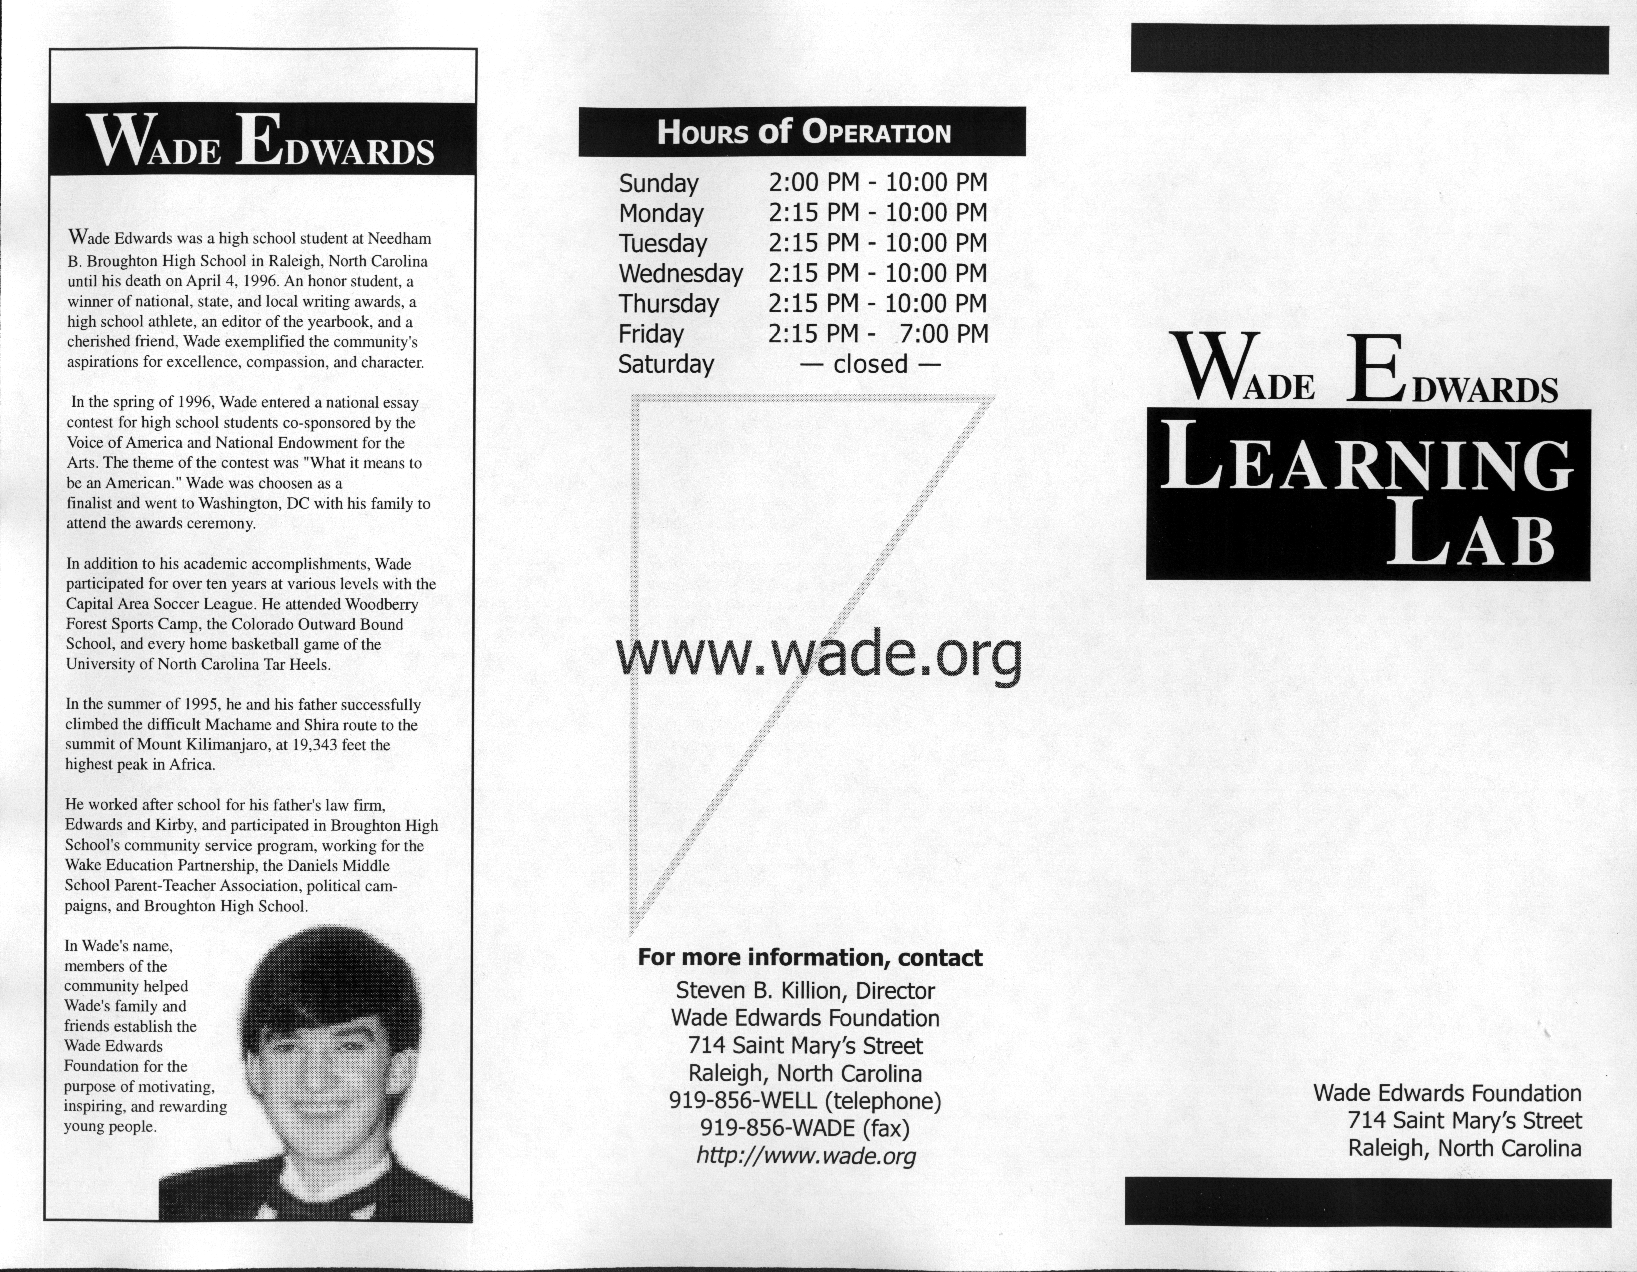 Outside of the brochure for Wade Edwards Learning Lab